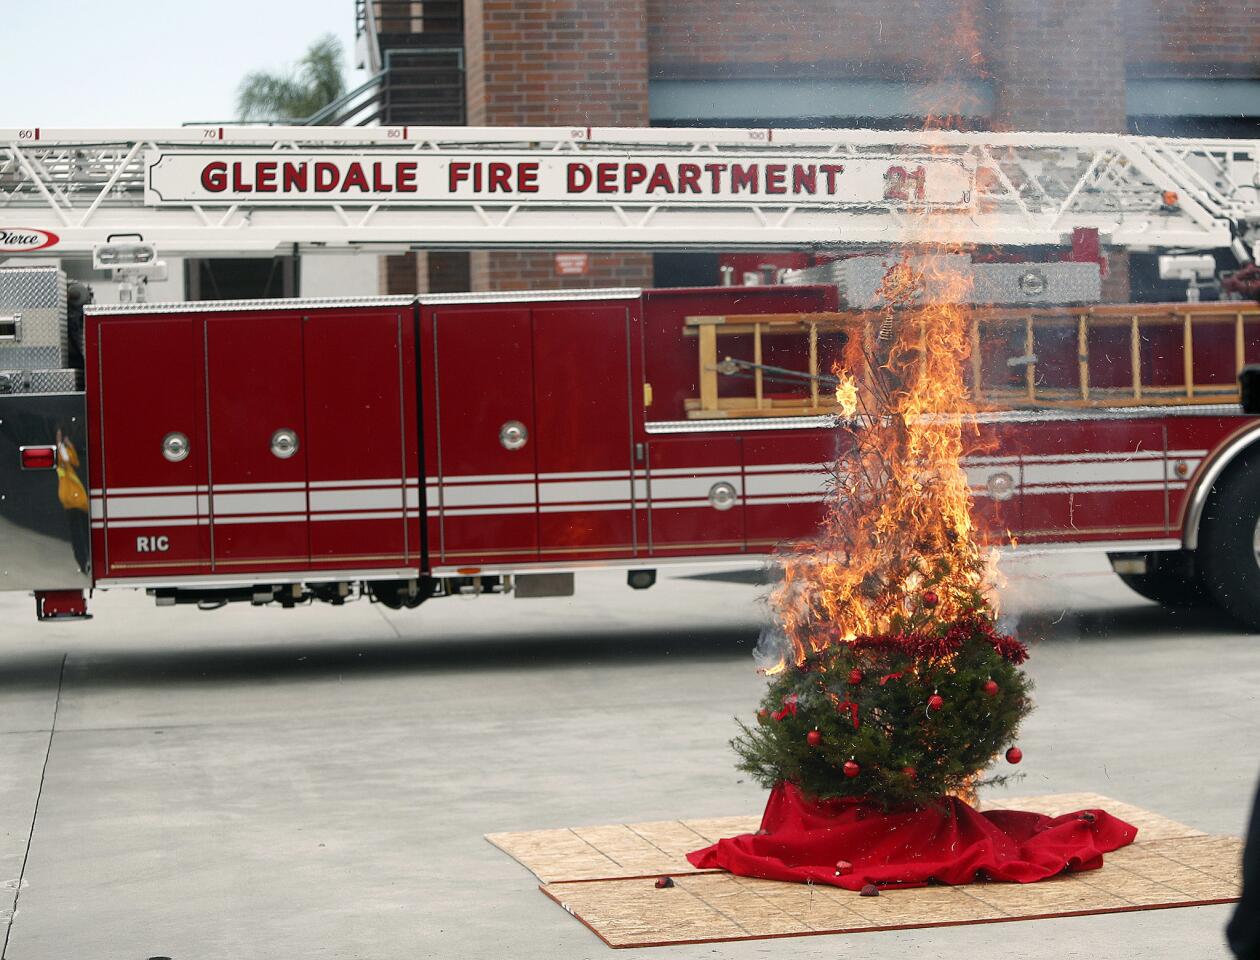 Photo Gallery: Glendale Fire Department demonstrates hazards around home during holidays